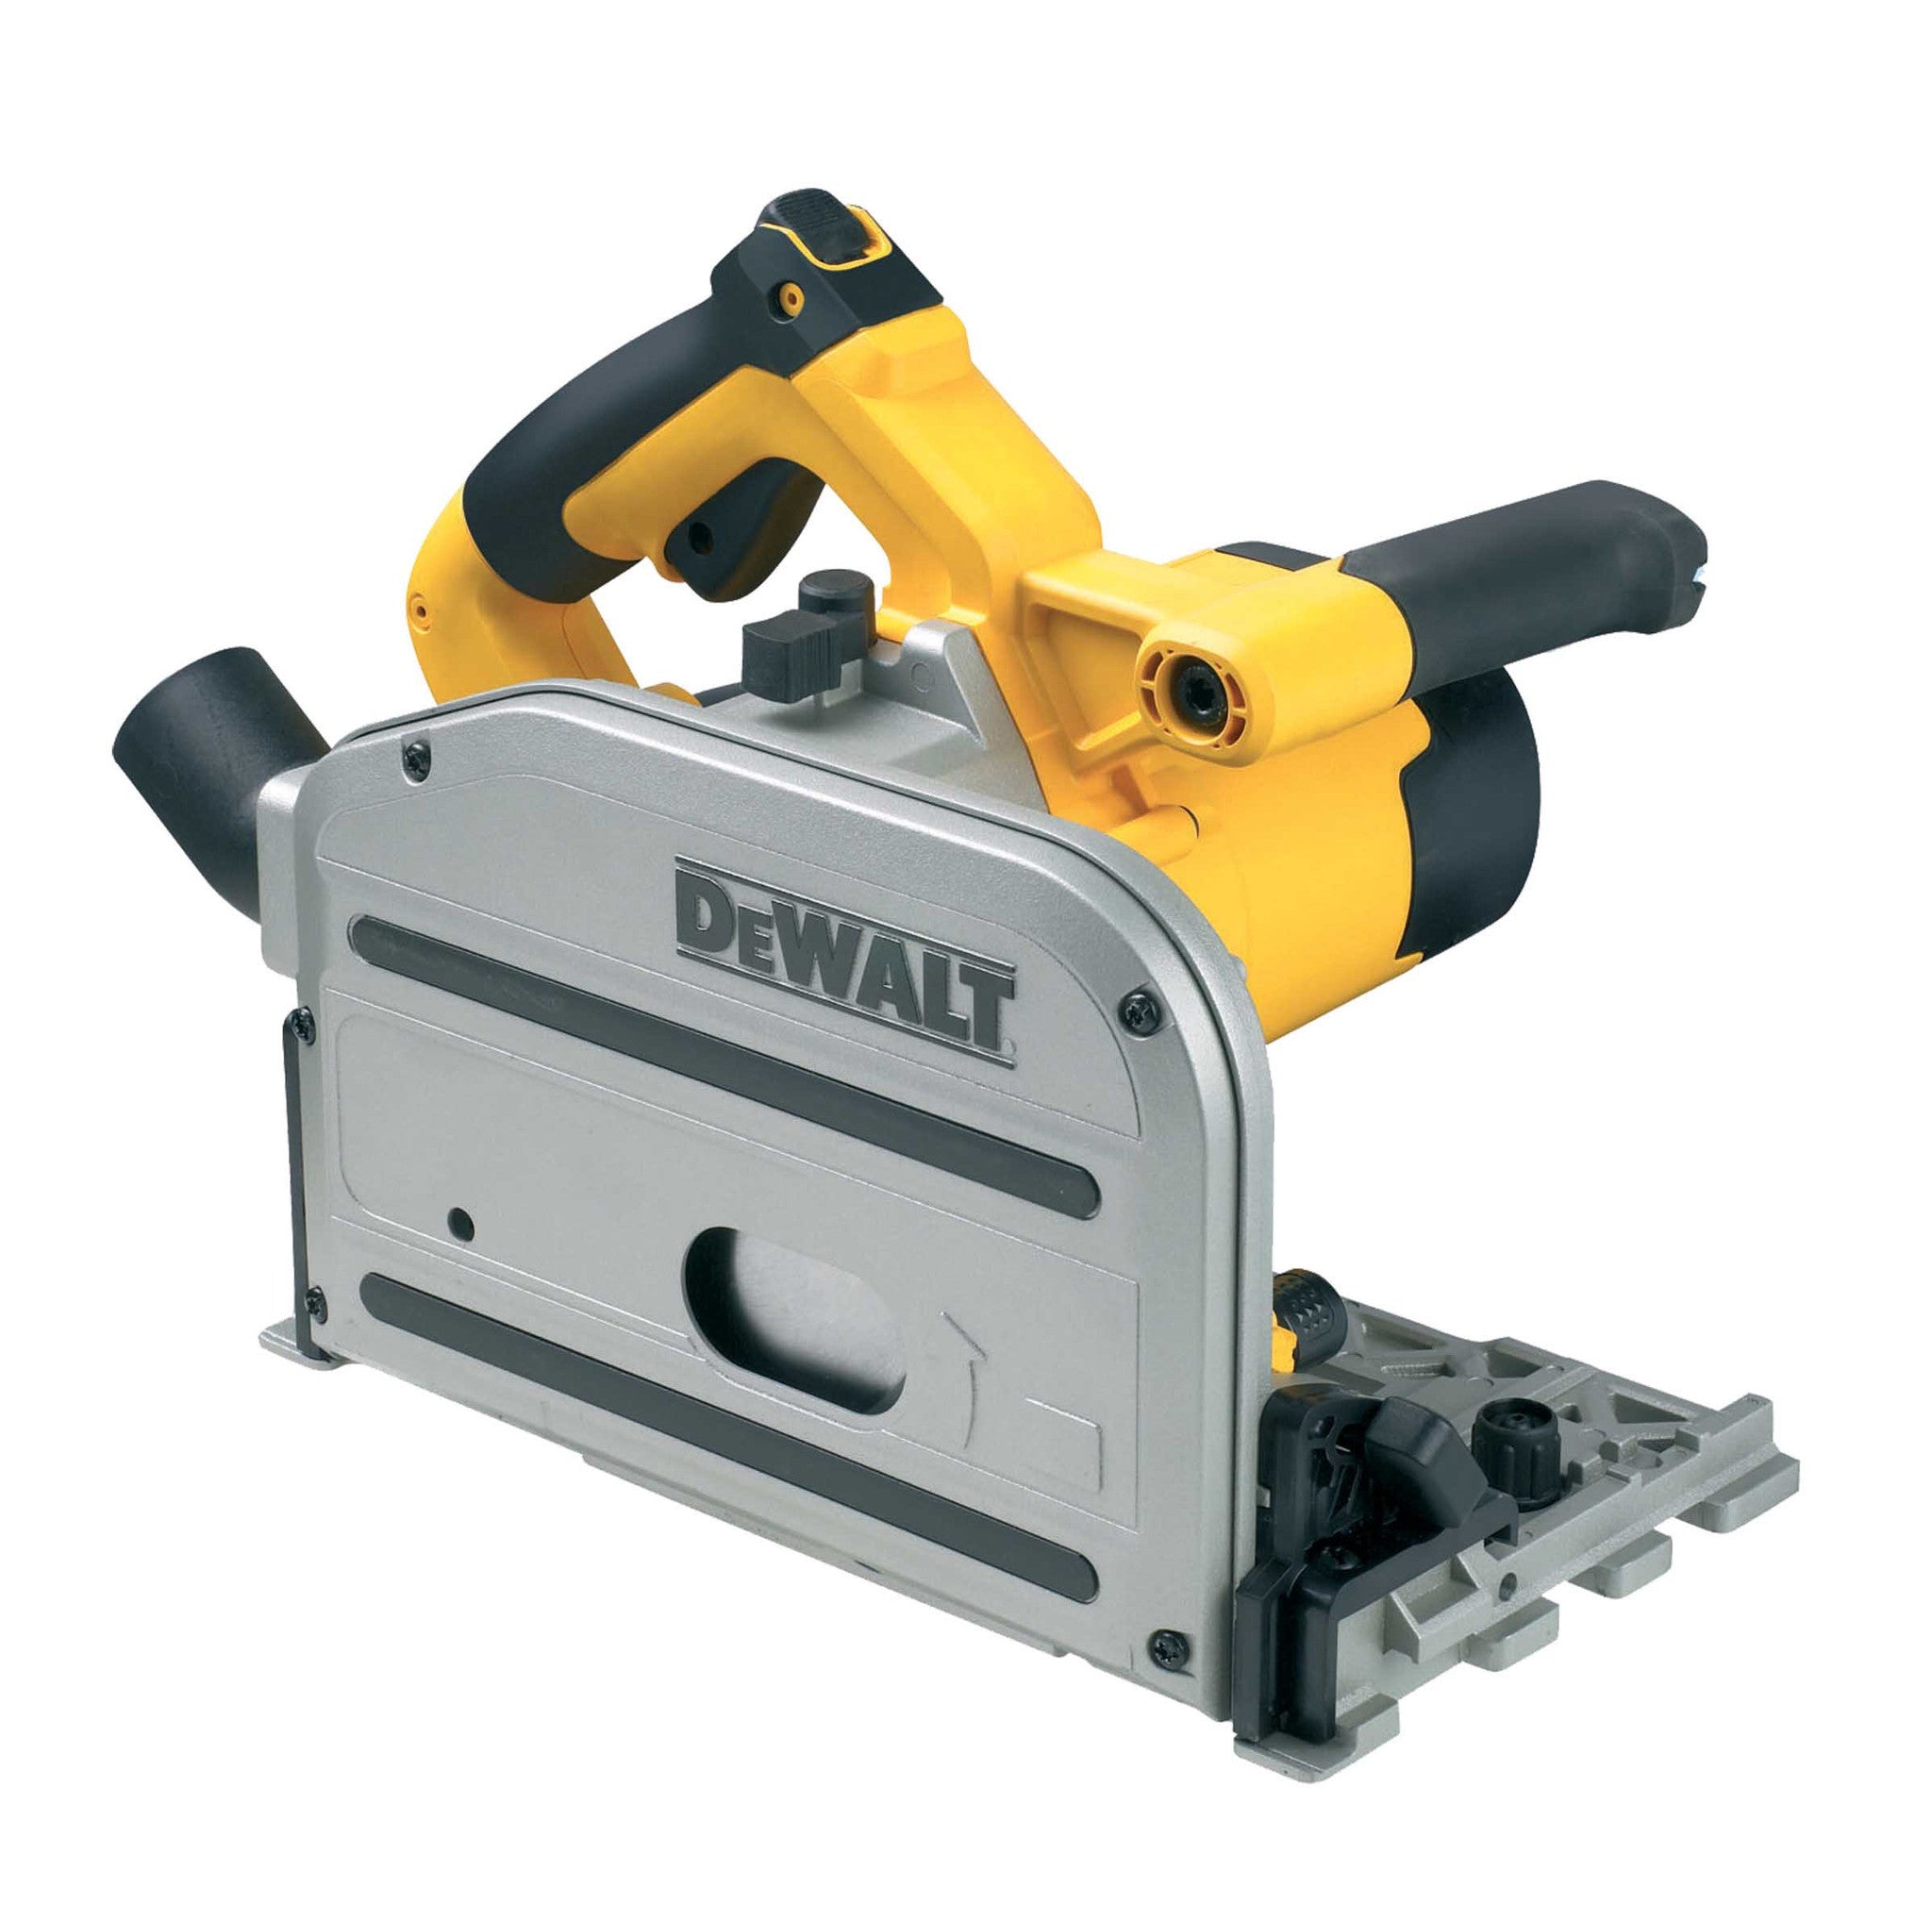 DWS520KR Plunge Saw - Example Store